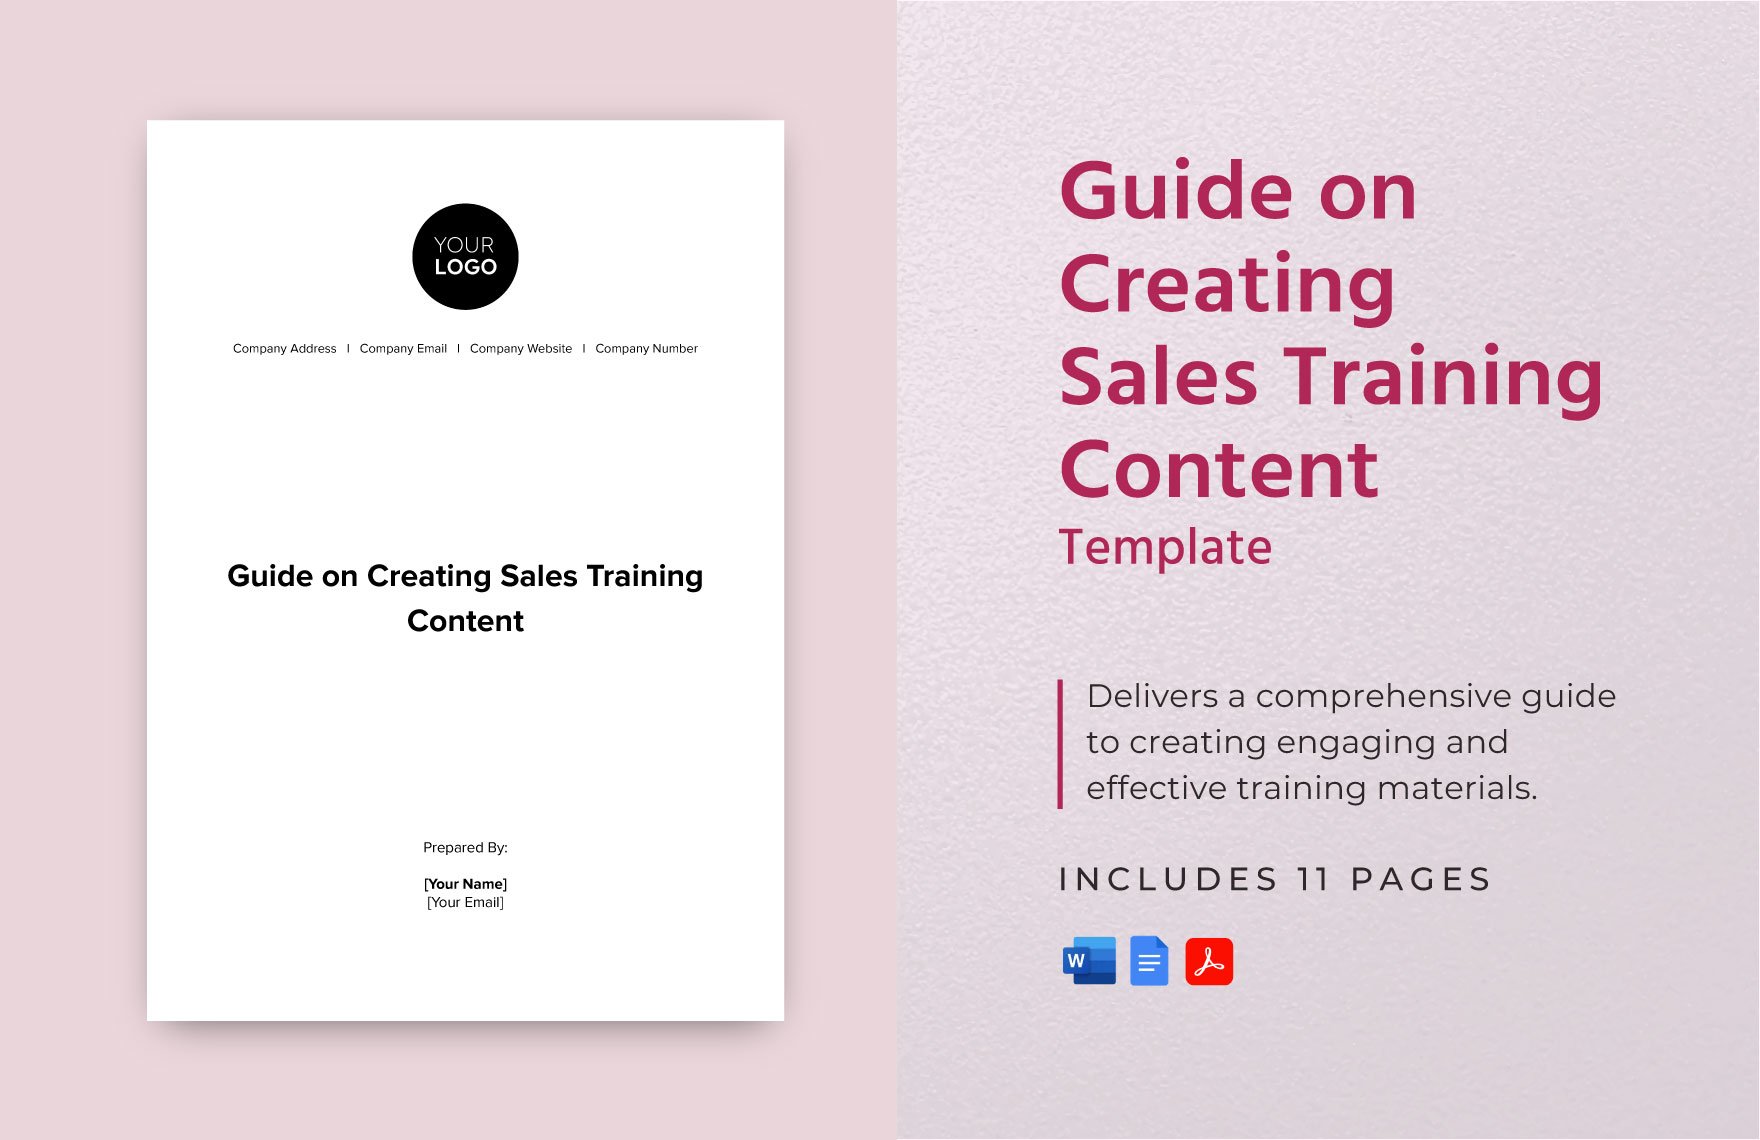 Guide on Creating Sales Training Content Template